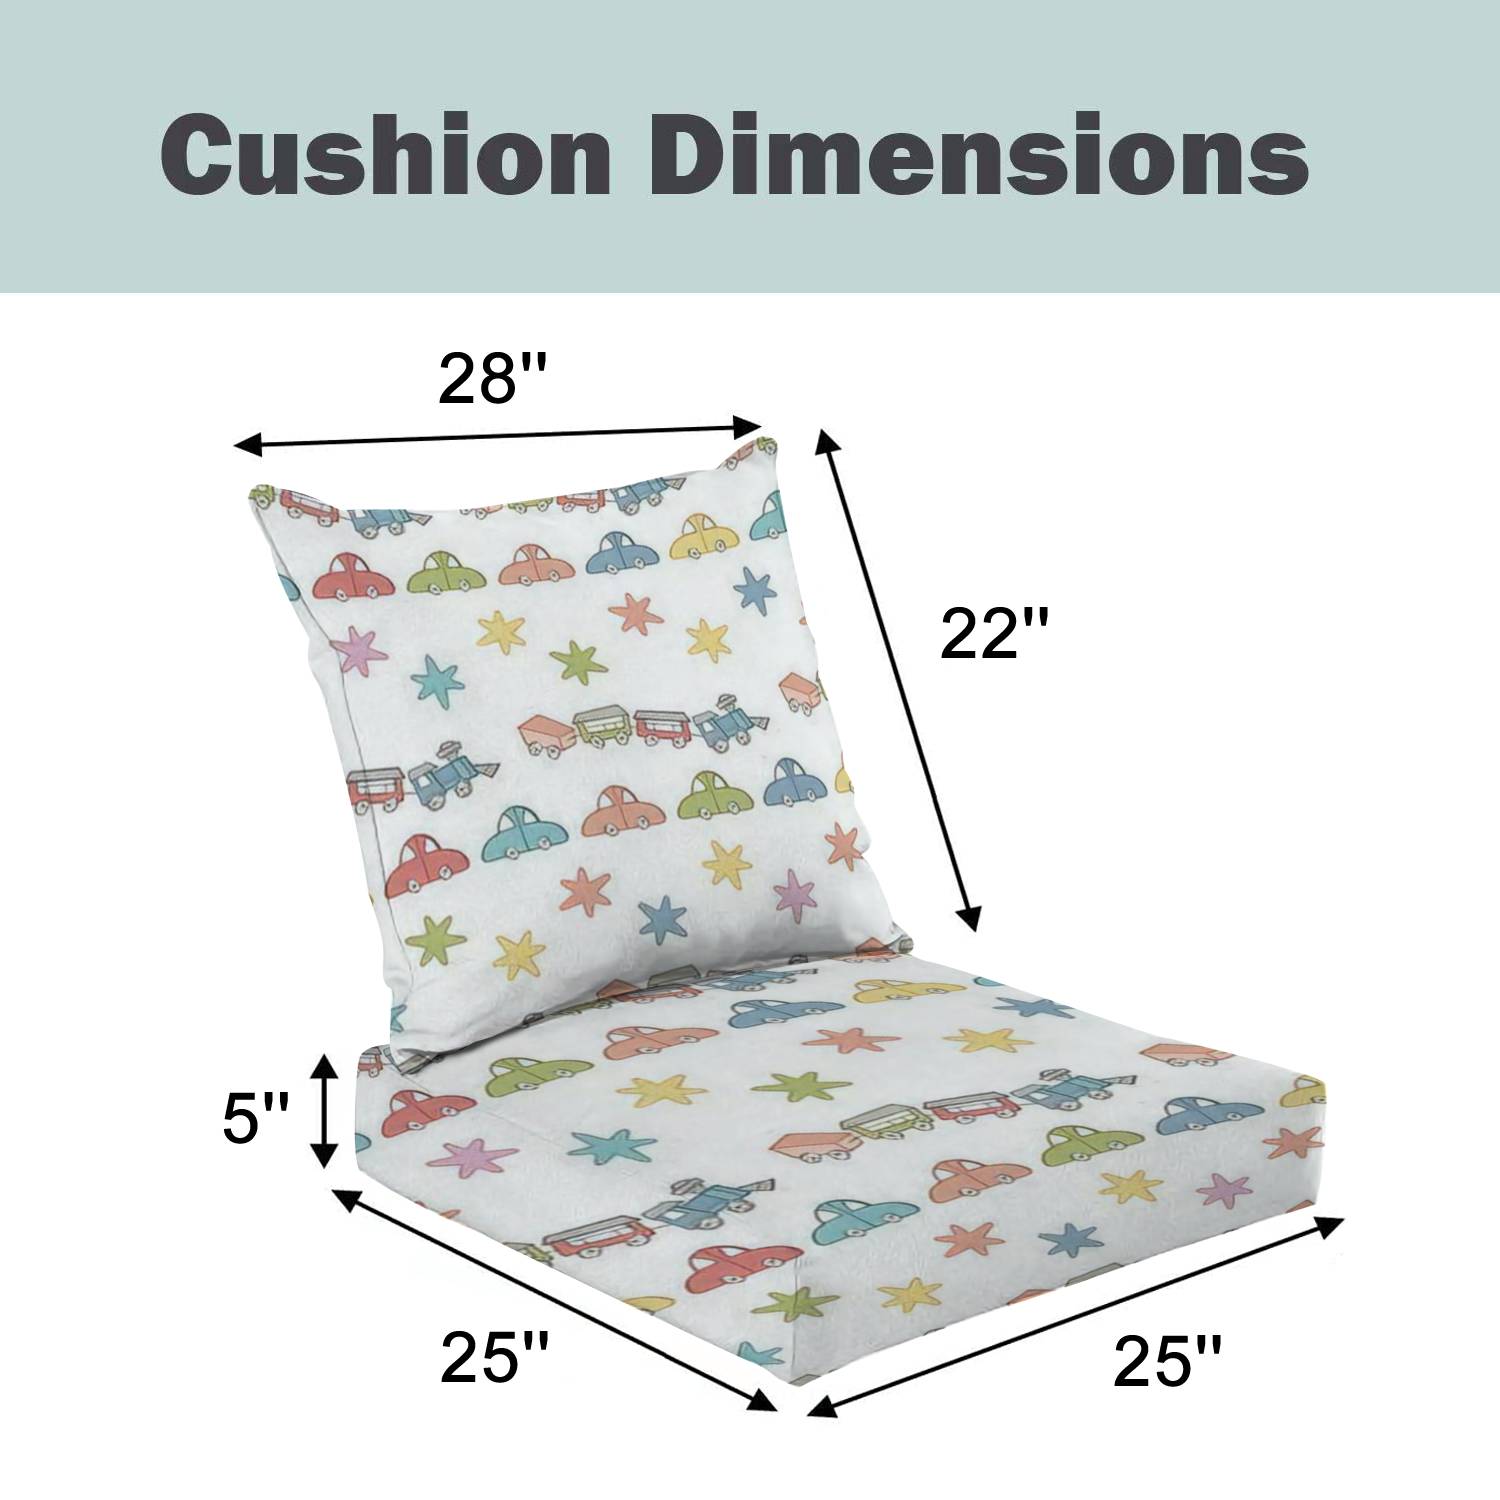 2-Piece Deep Seating Cushion Set Toy train cars Stars Seamless Doodle cartoon print White Outdoor Chair Solid Rectangle Patio Cushion Set - image 3 of 5